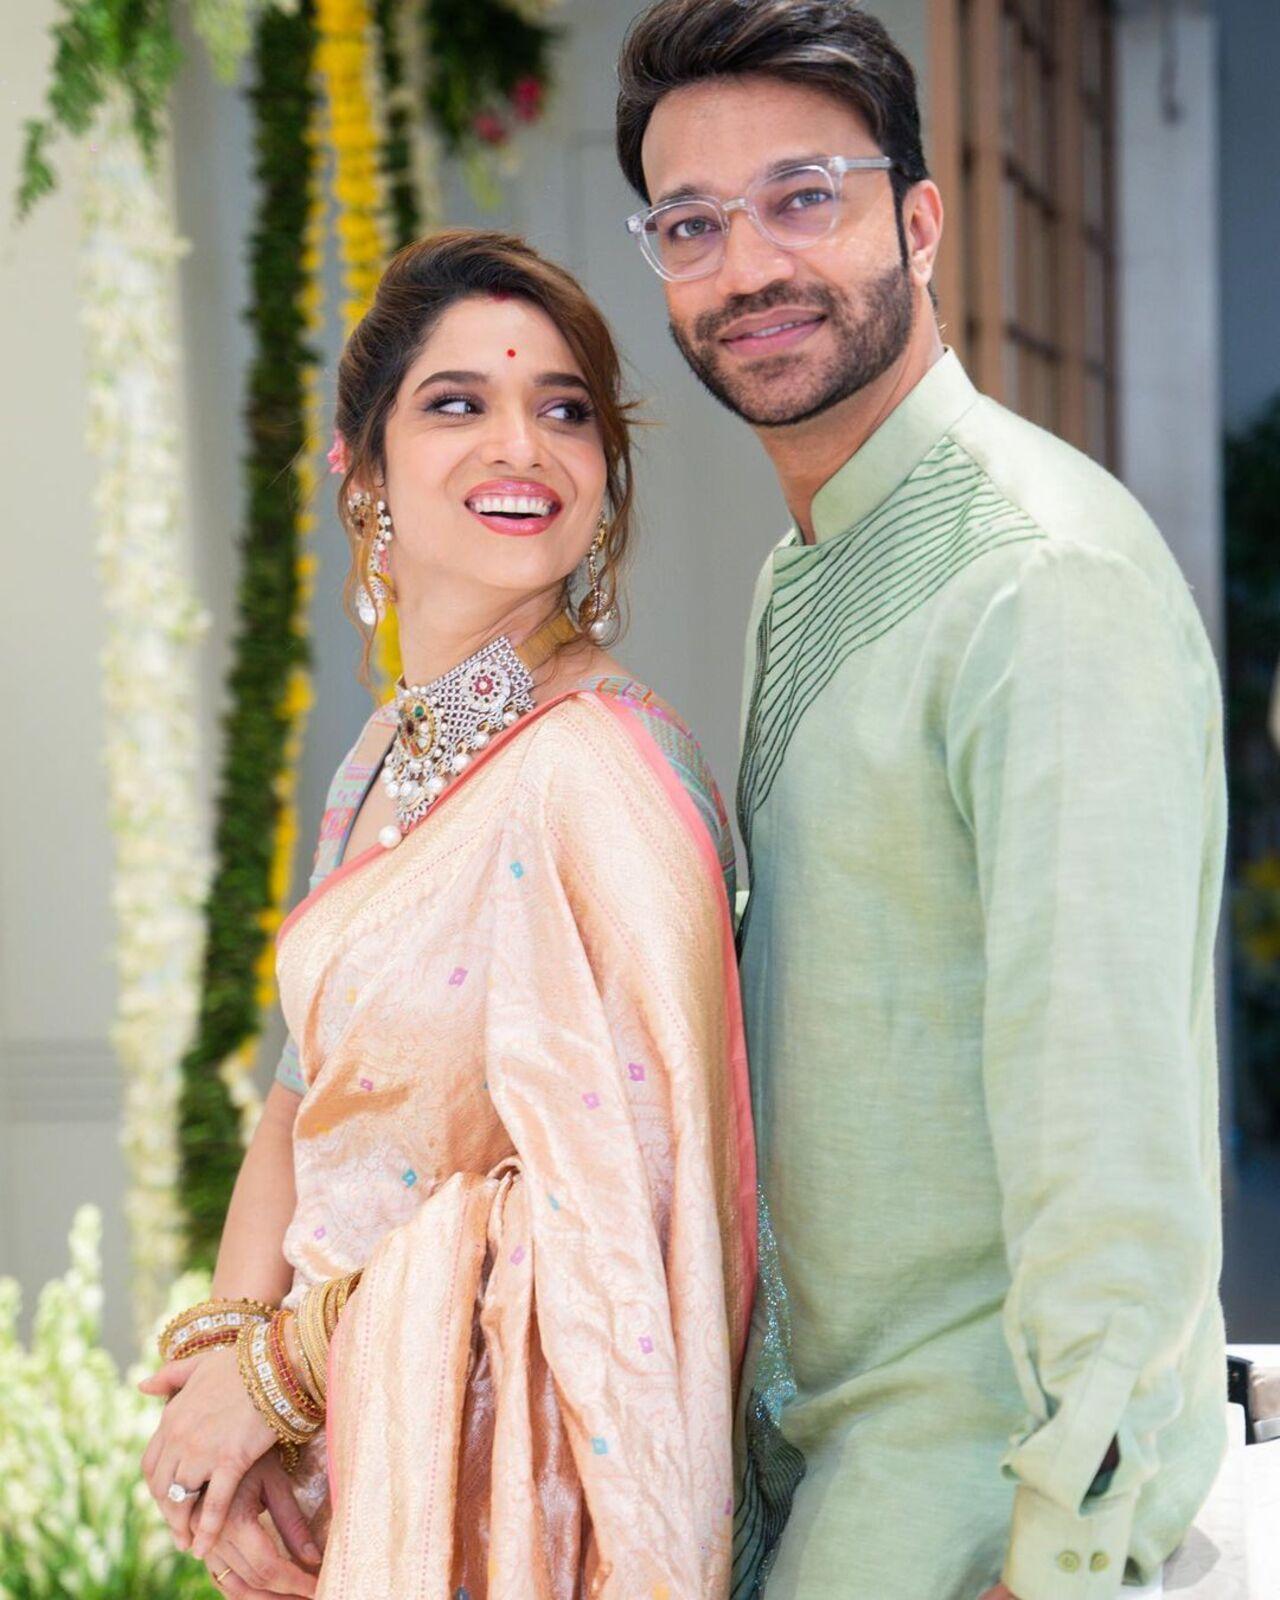 Ankita Lokhande and Vicky Jain looked stunning in this beautiful and heartwarming photograph, wearing pastel outfits